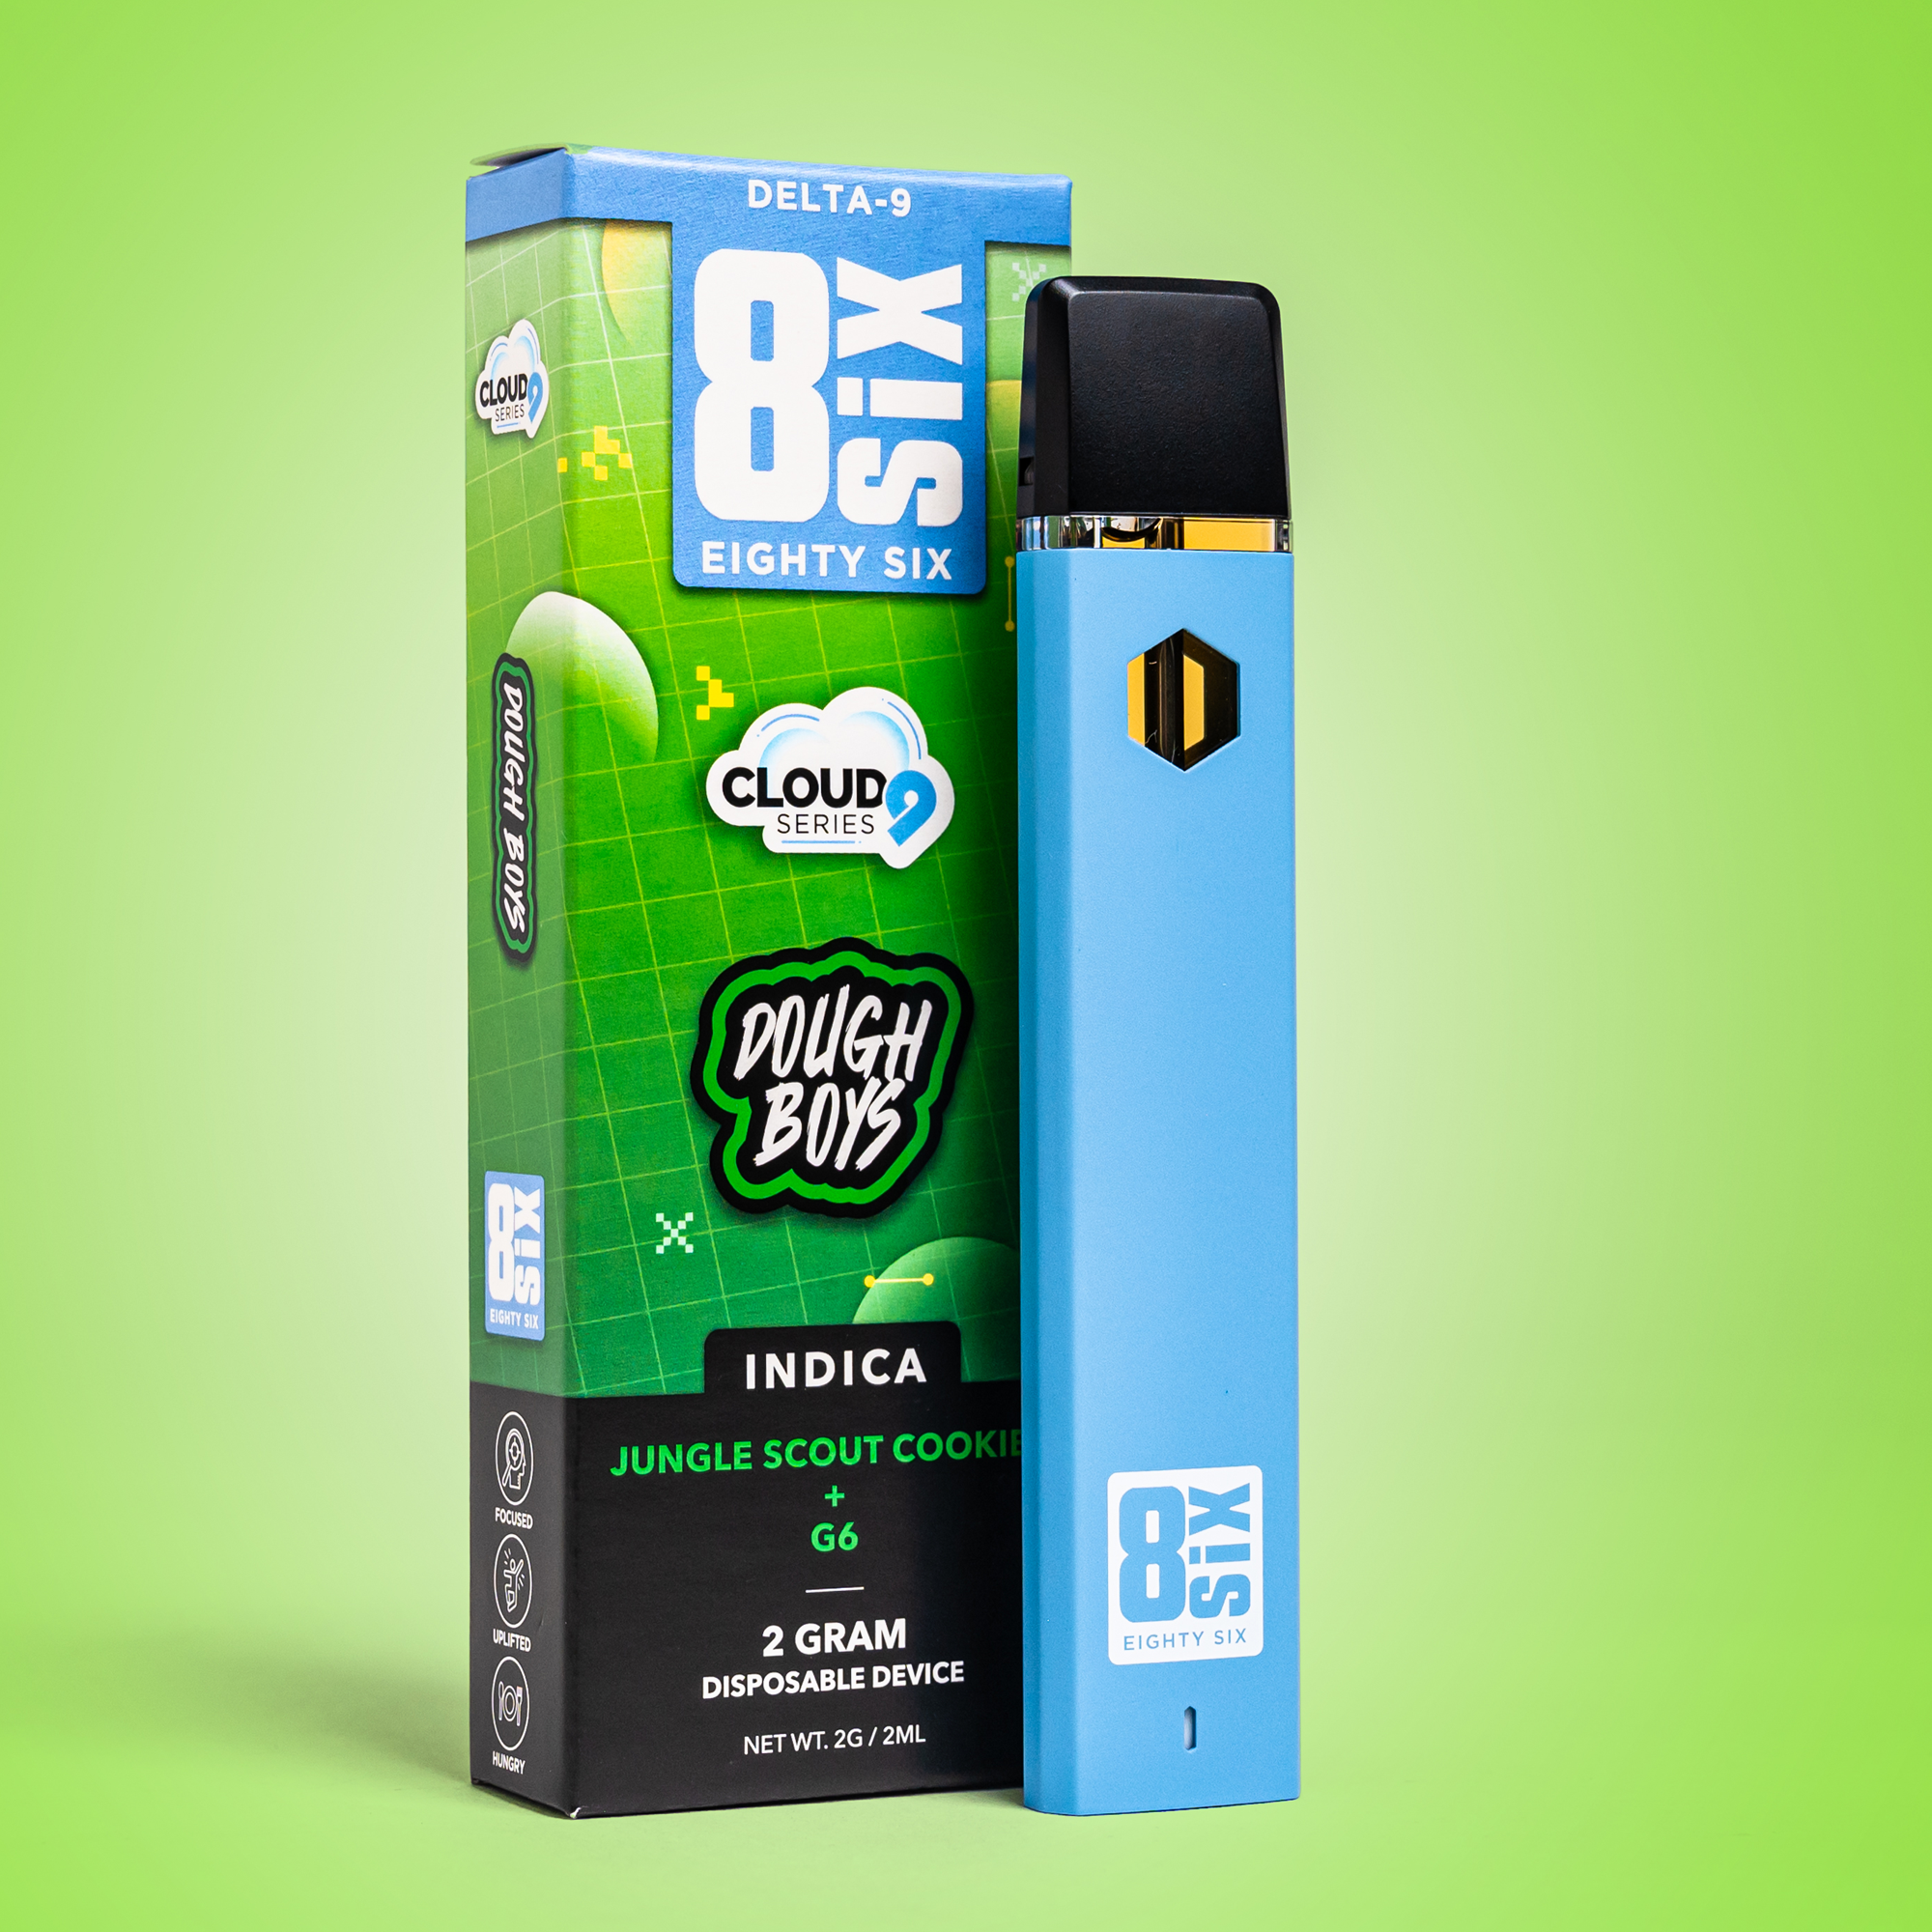 Eighty Six Dough Boys Delta-9 THC 2G Disposable (Jungle Scout Cookies) Best Price